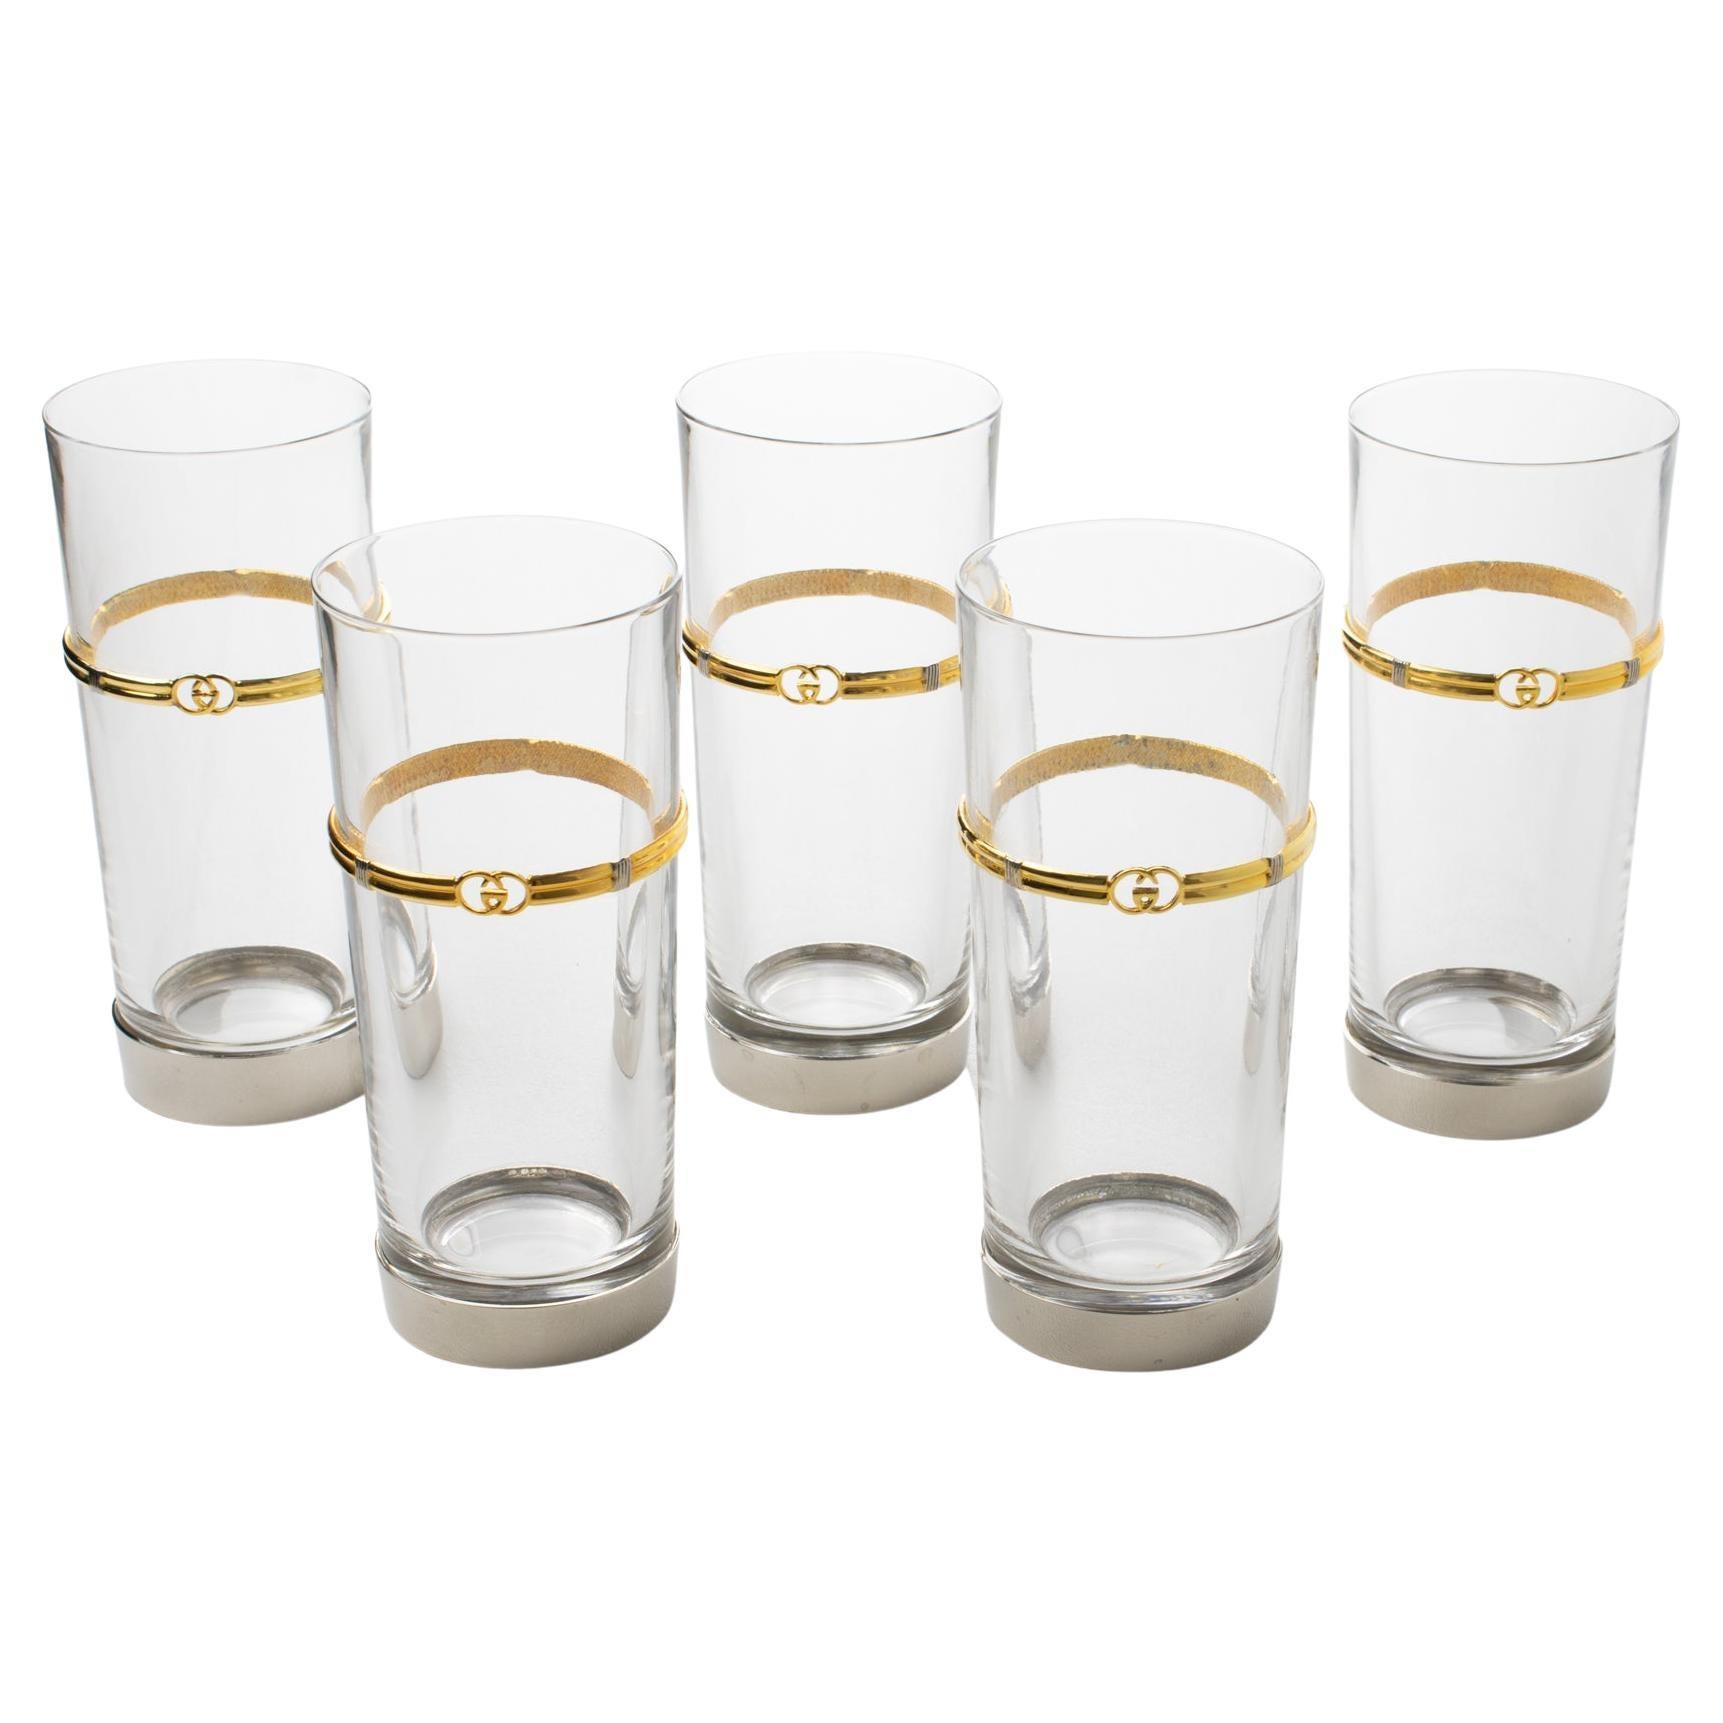 Gucci Italy Barware Set Silver Plate and Crystal HighBall Tumbler Glasses, 5 pc For Sale